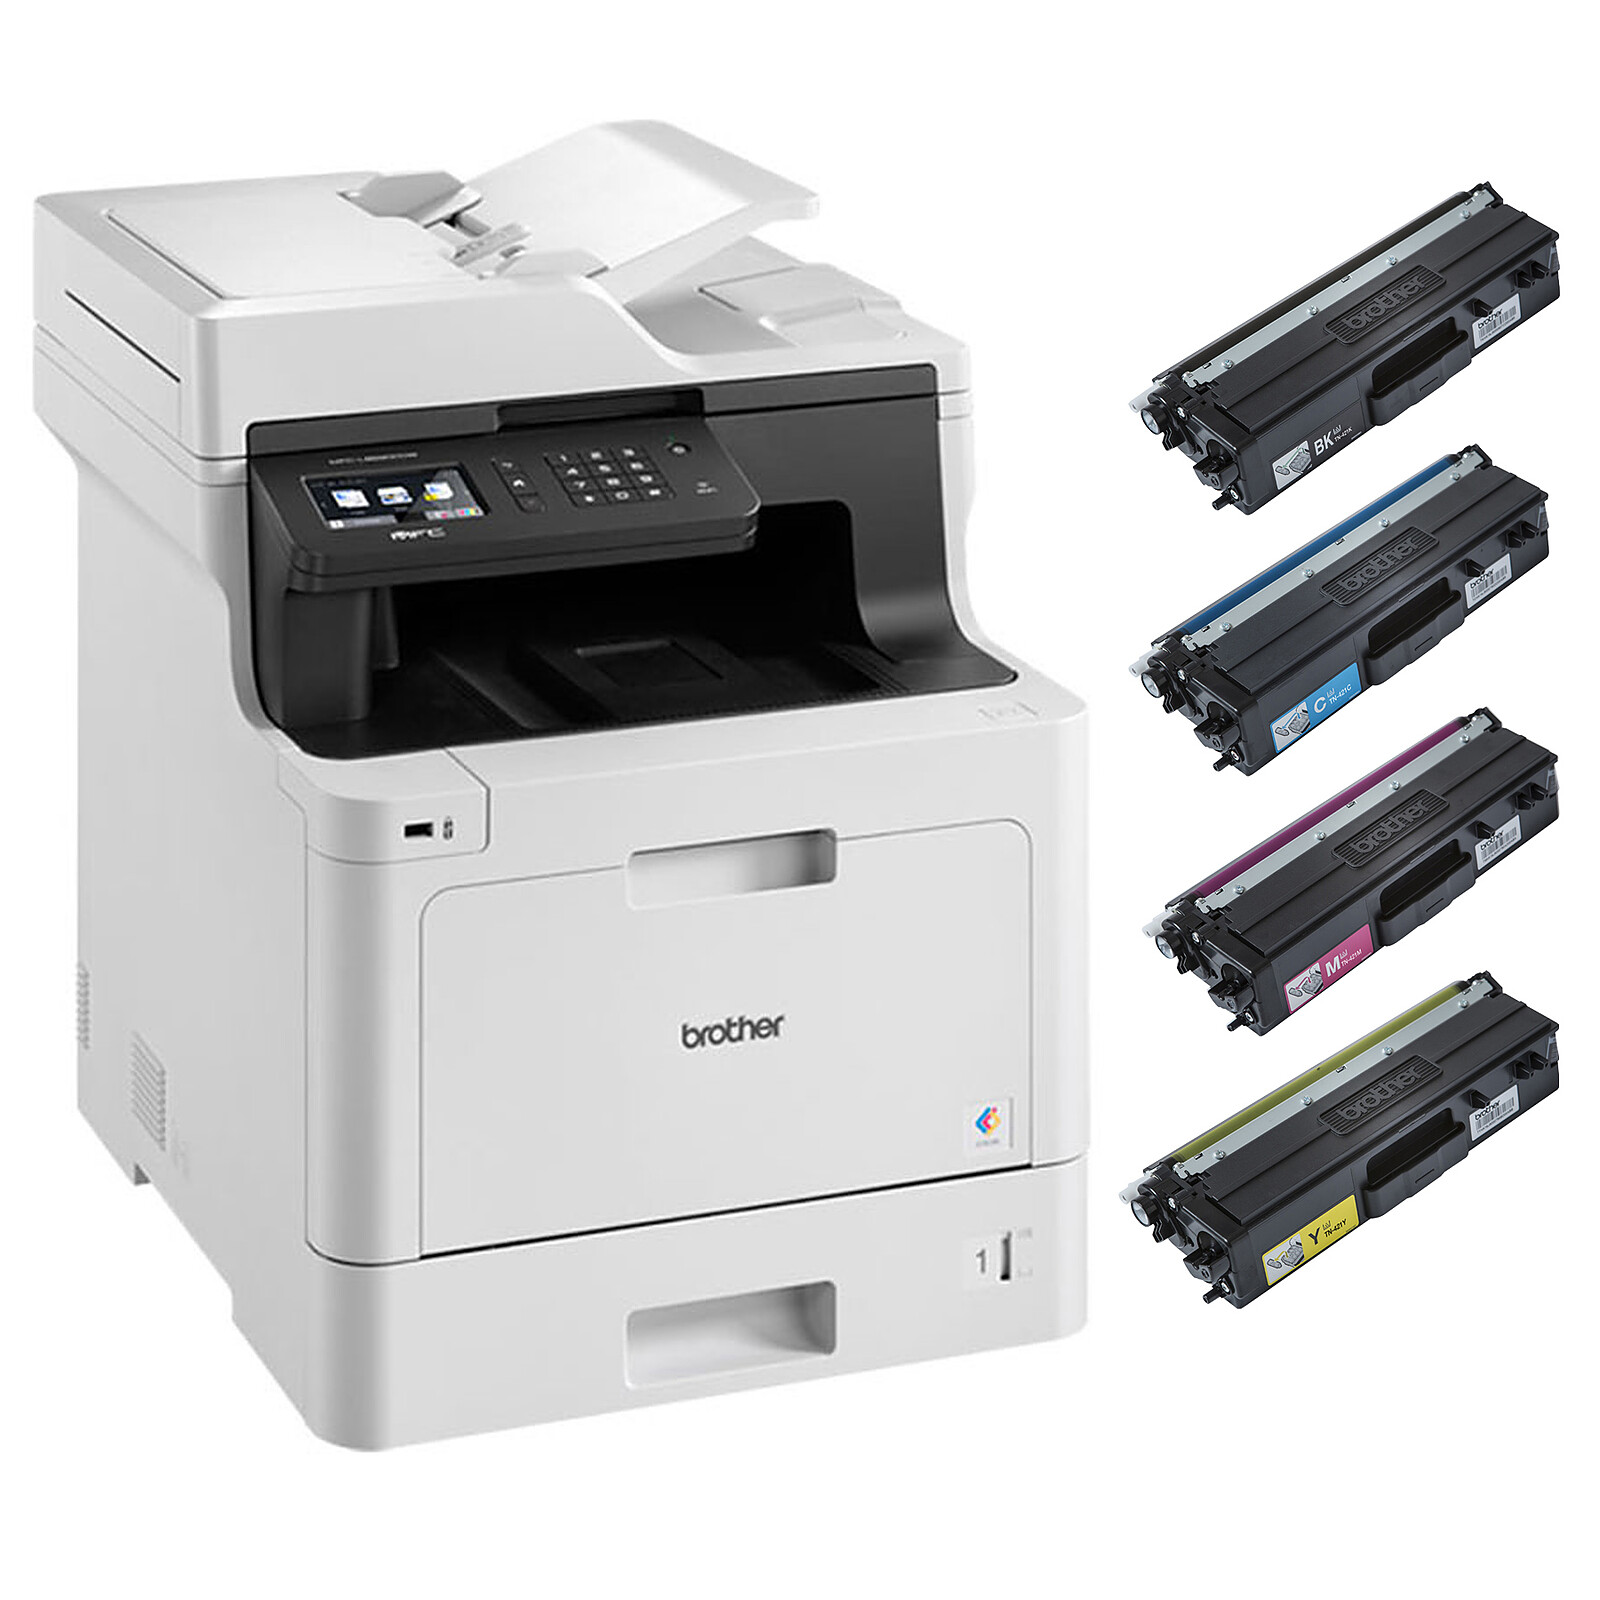 Brother MFC-L8690CDW Multifunction Printer Accessories